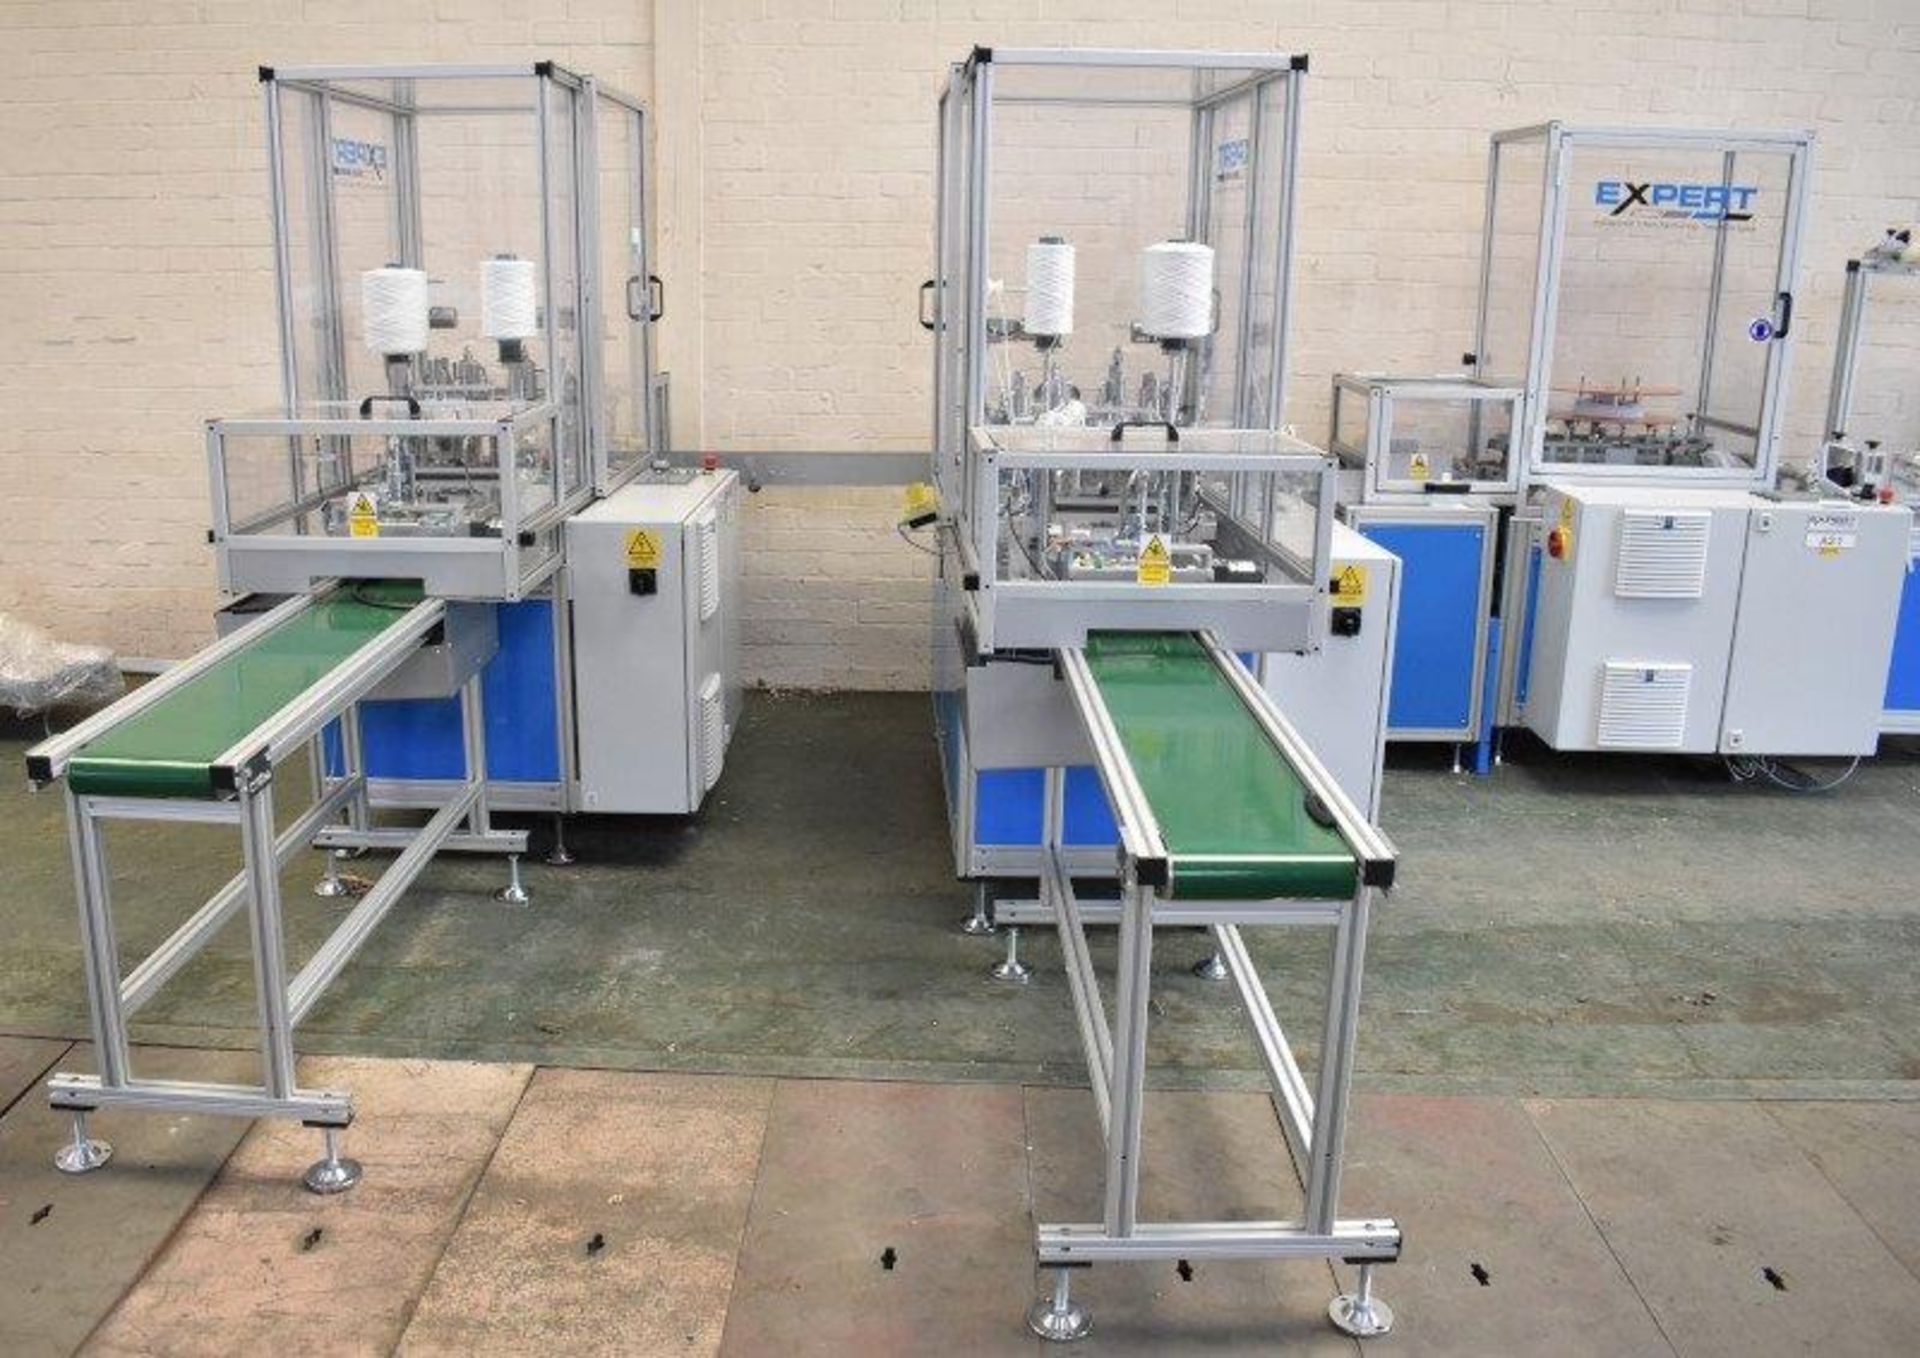 Expert fully automated Mask Making Machine including an Ilapak Smart flow wrapping packaging machine - Image 9 of 28